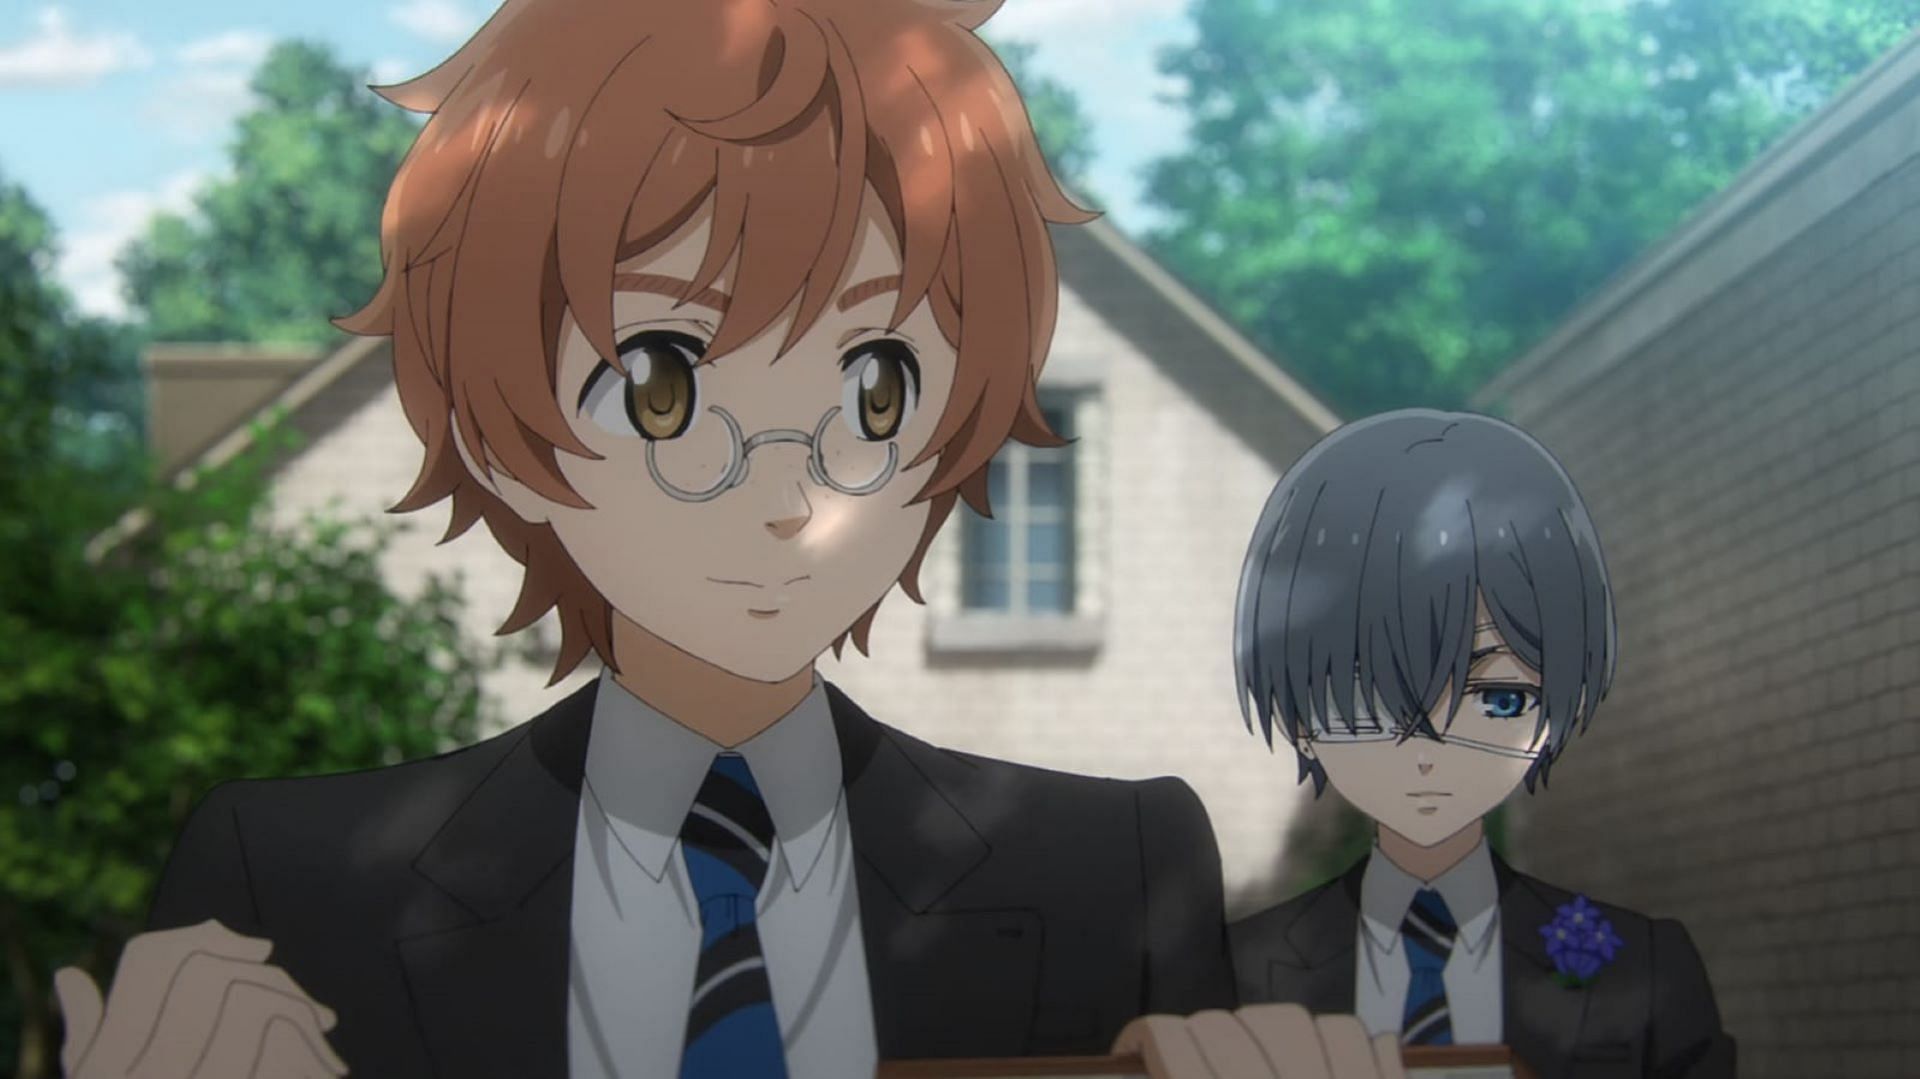 McMillan and Ciel, as seen in the episode (Image via Cloverworks)